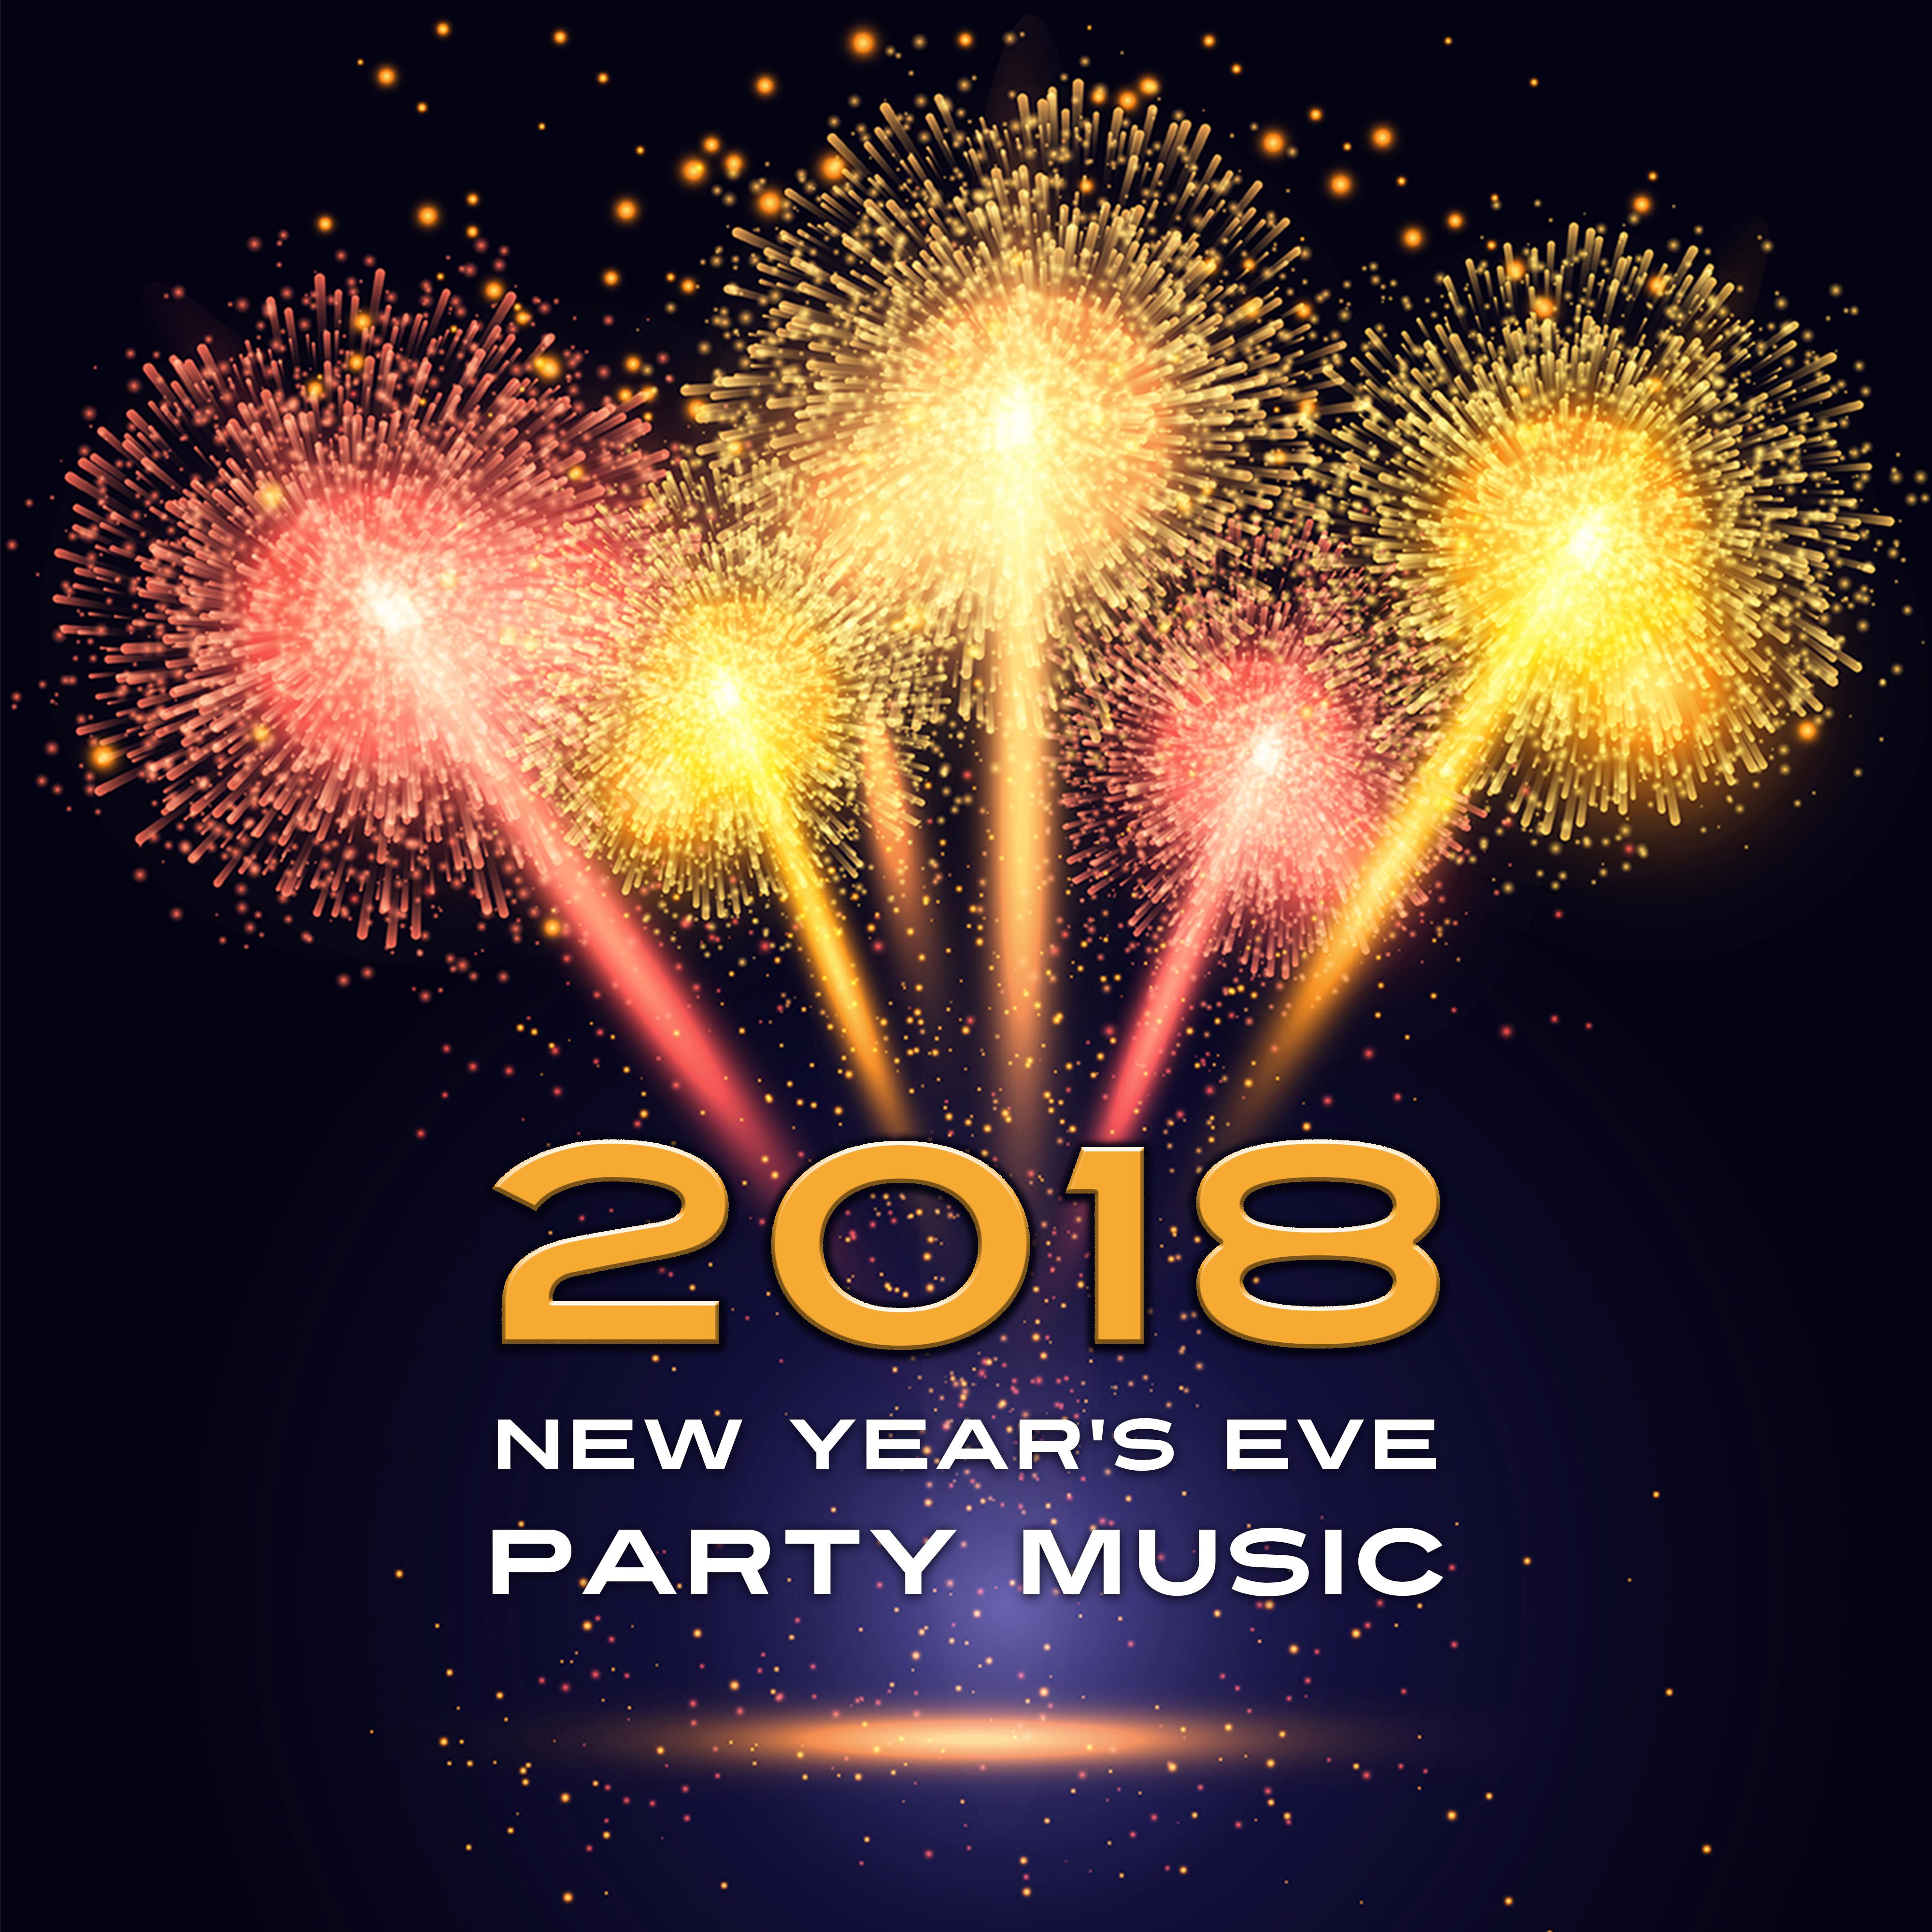 2018 New Year's Eve Party Music